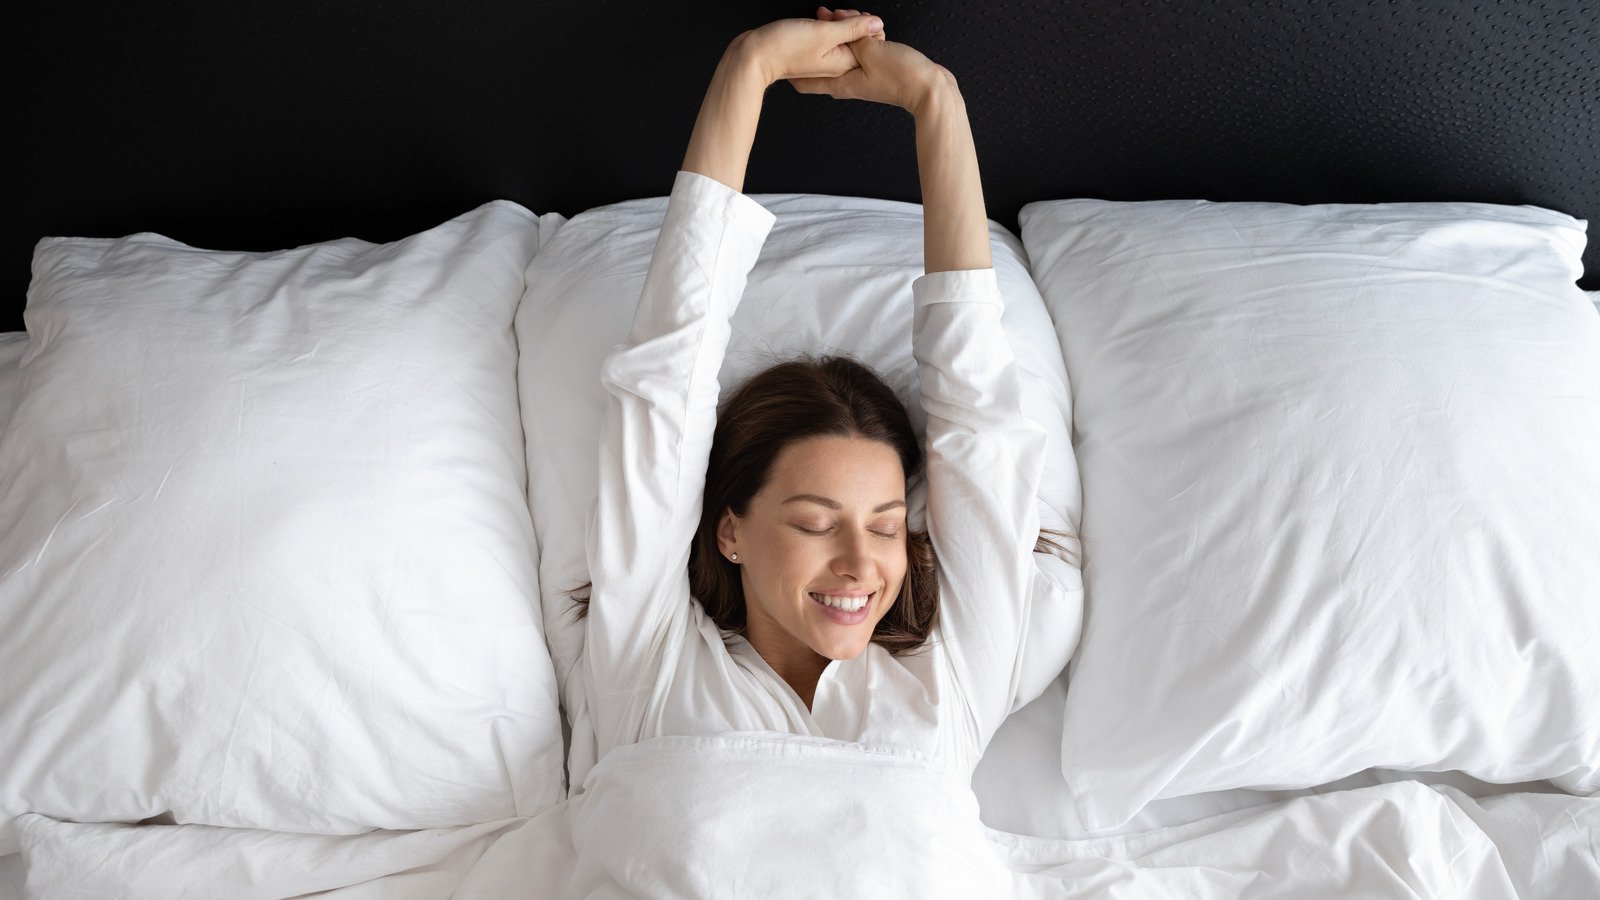 How To Improve Your Sleep Based On Your Chronotype